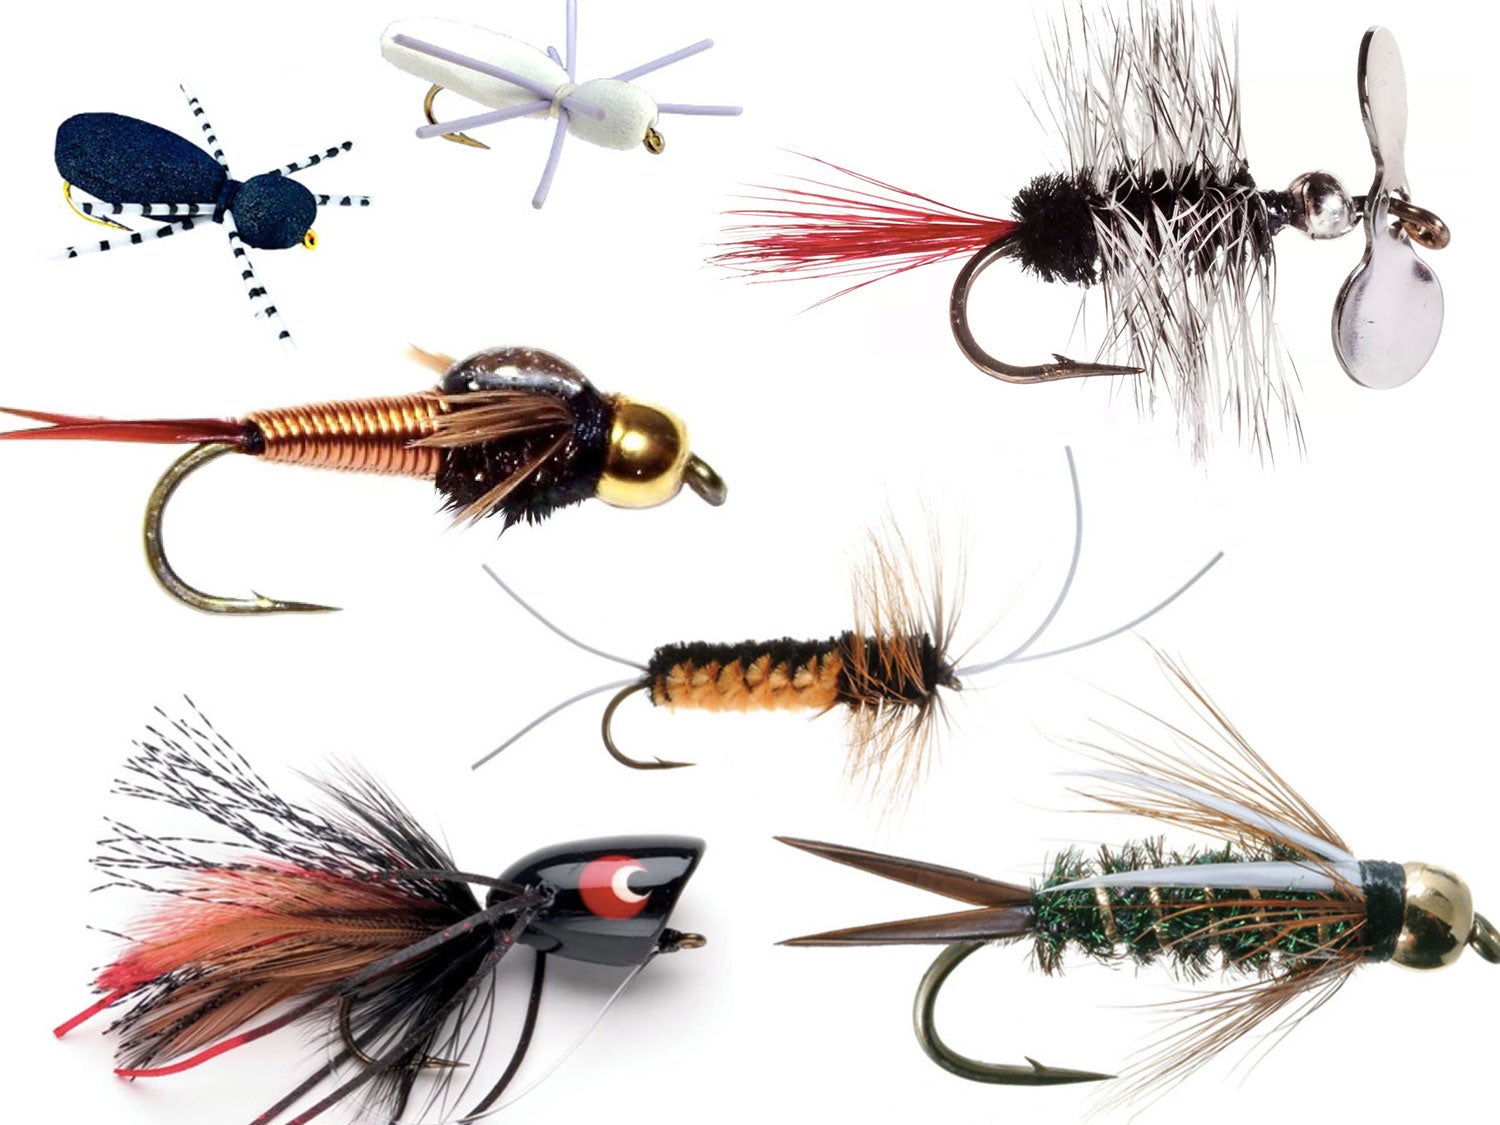 1 PANFISH TROUT BASS BREAM CRAPPIE BLUEGILL POPPER FLY FISHING YELLO CORK SPIDER 